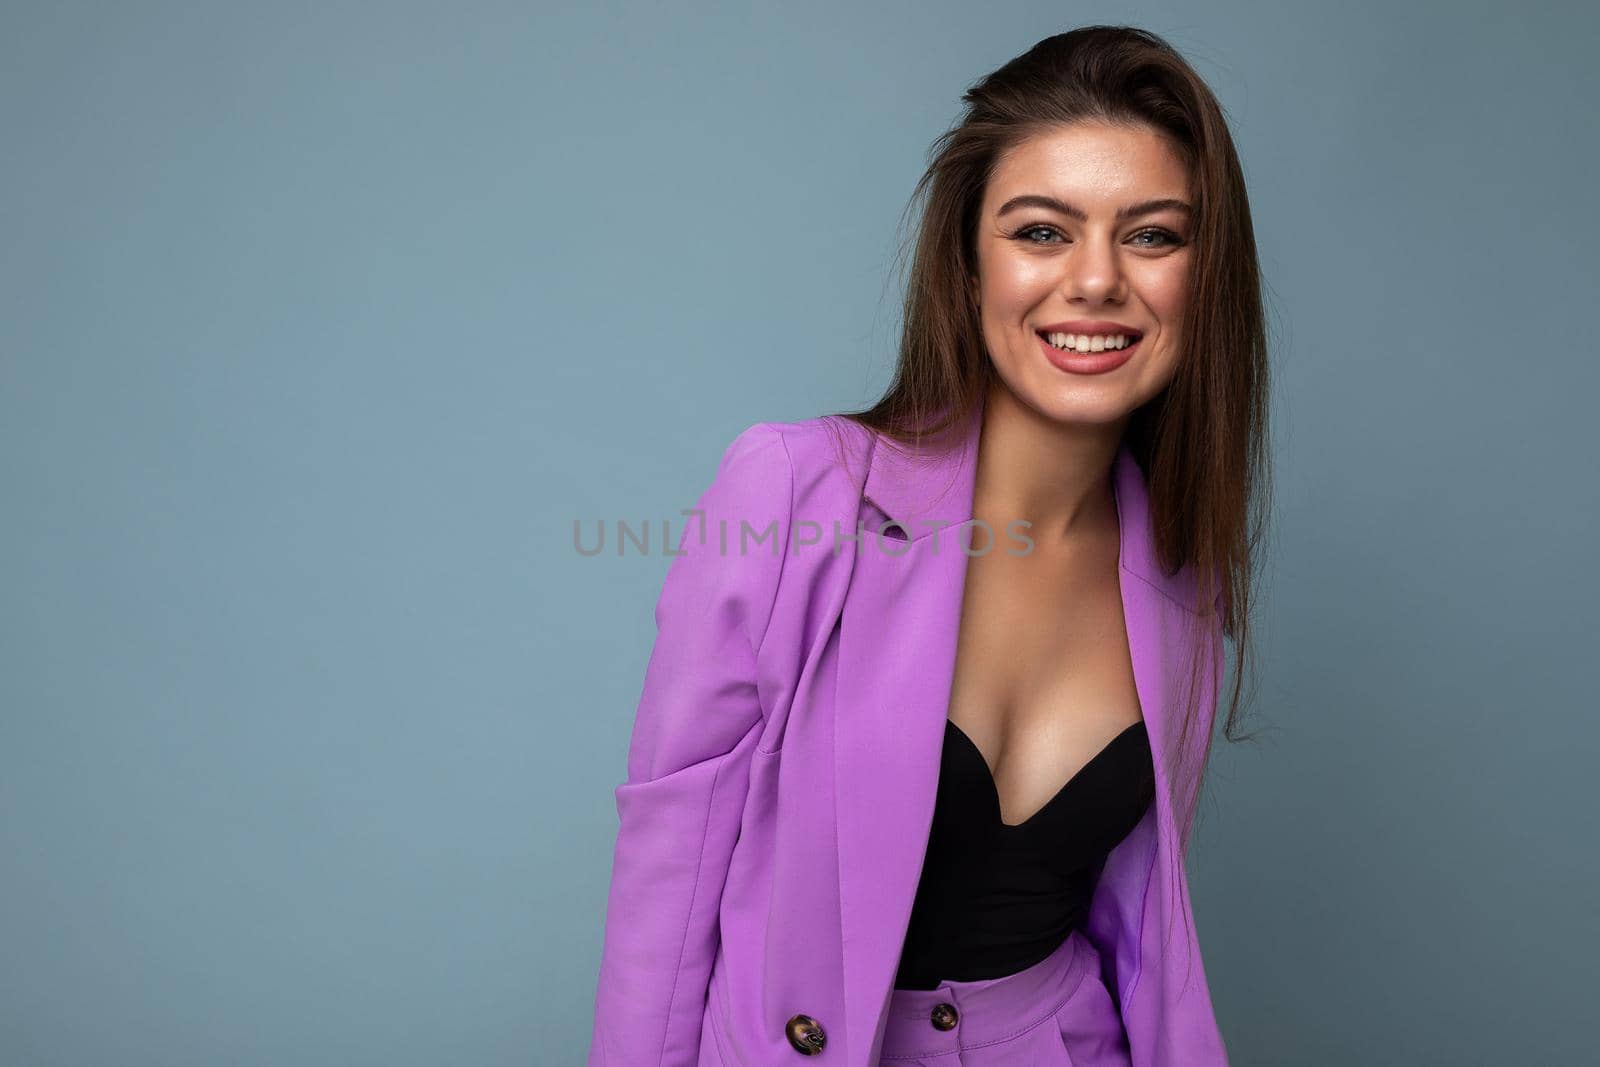 Young happy smiling brunette woman nice-looking attractive charming elegant fashionable wearing stylish suit with jacket isolated over blue background with copy space. Fun anf joy concept by TRMK